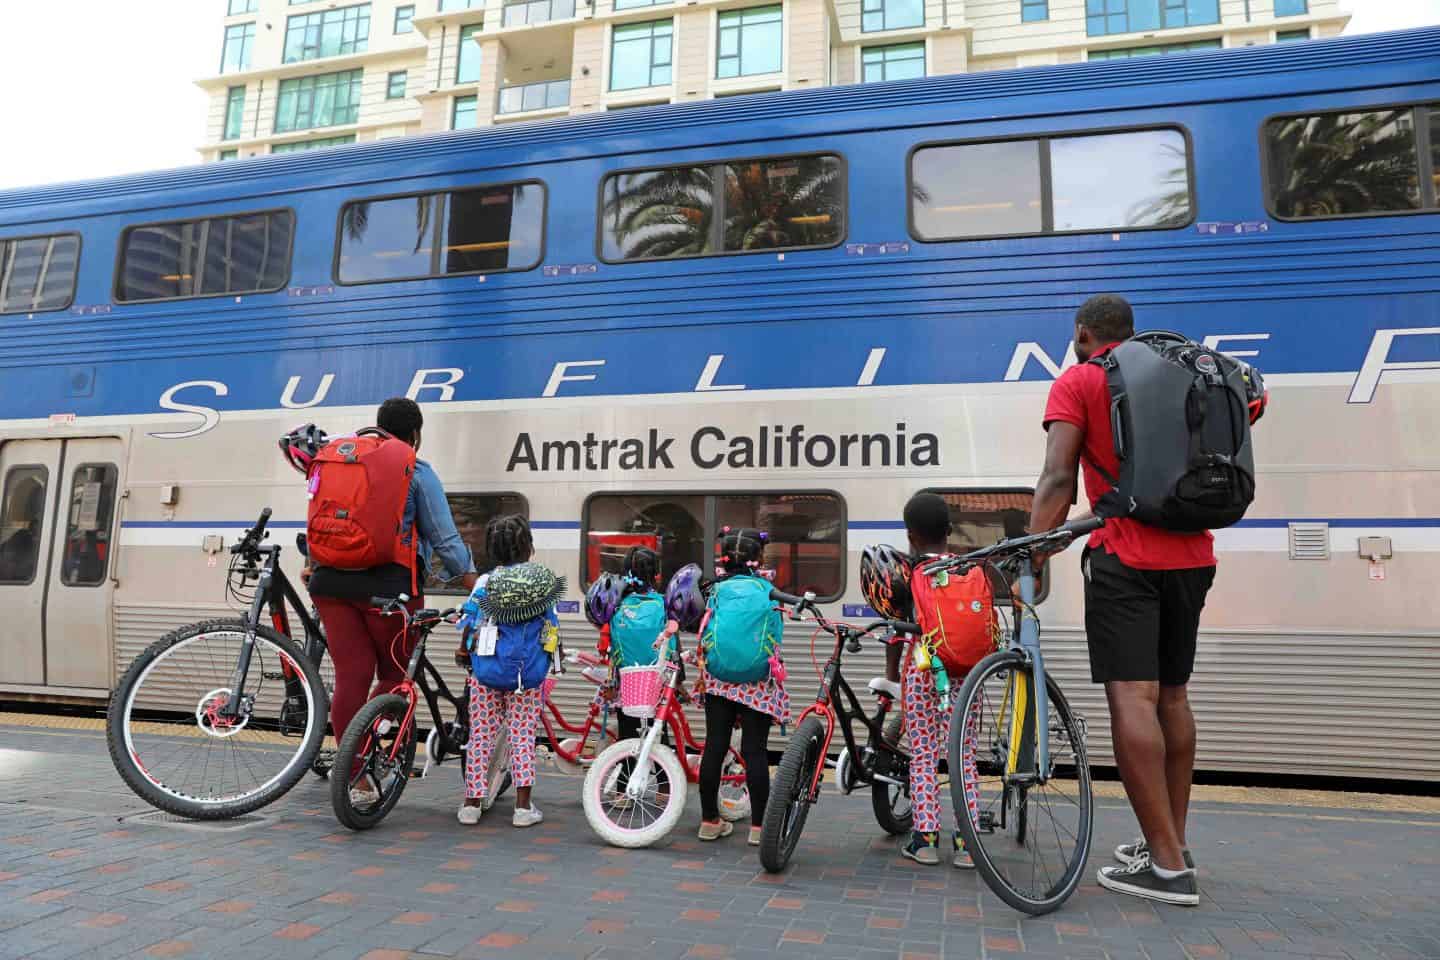 Family getting ready to board the Los Angeles To San Diego Amtrak with backpacks and bikes